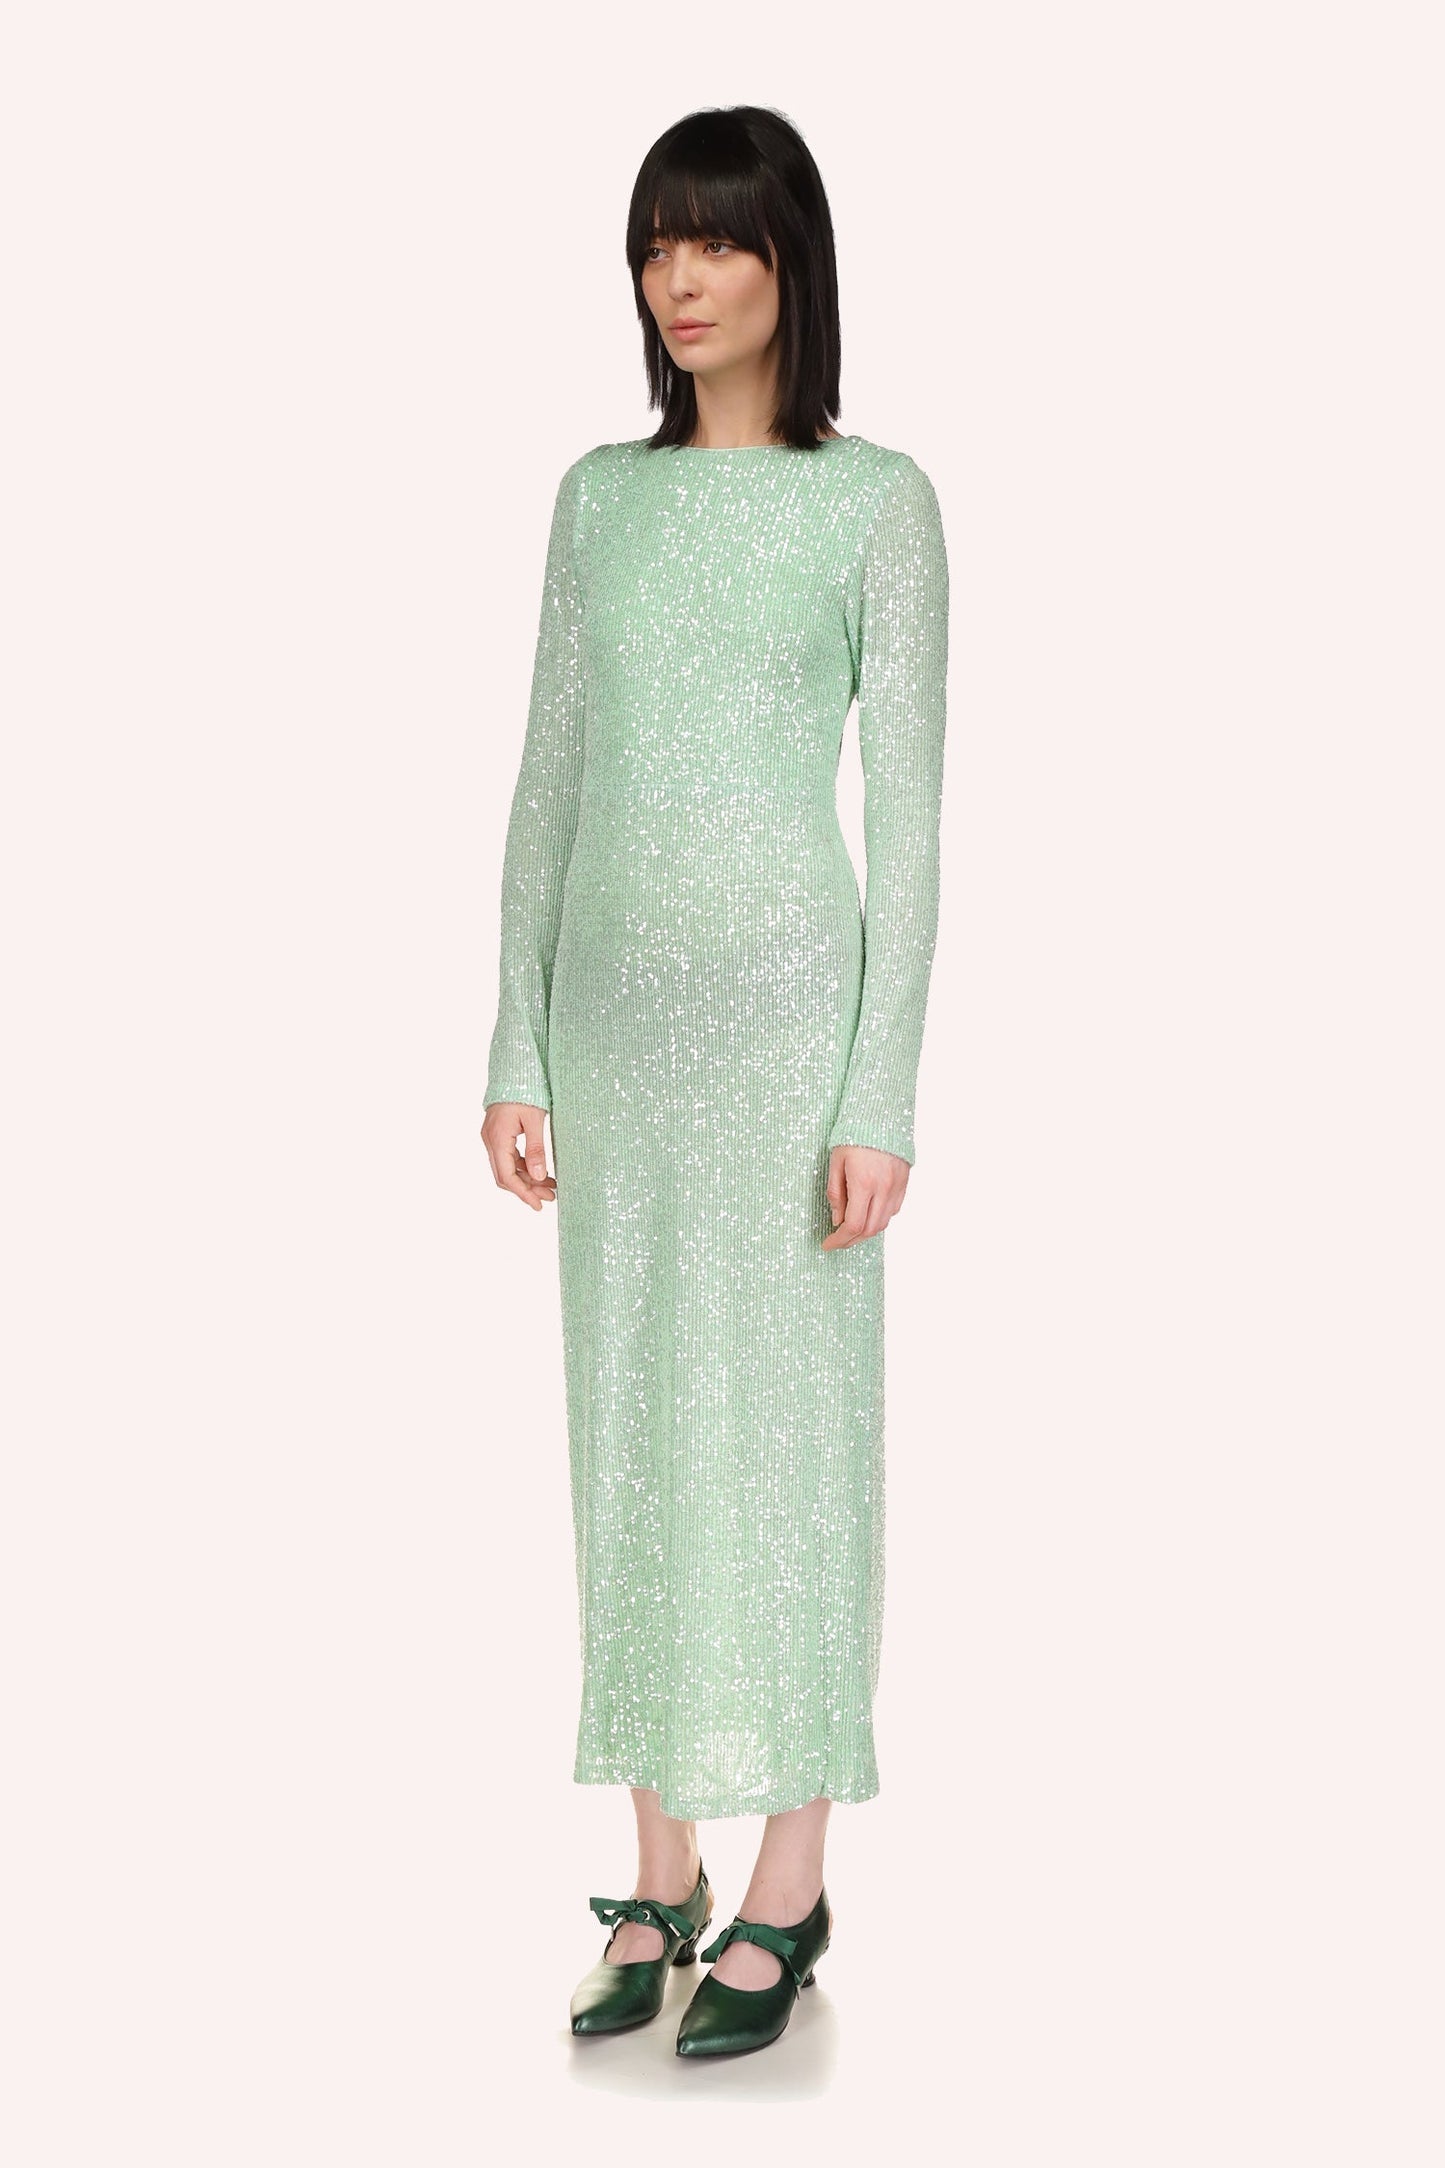 Anna Sui's Sequin Mesh Dress peppermint, ankles long, neckline collar, long sleeves